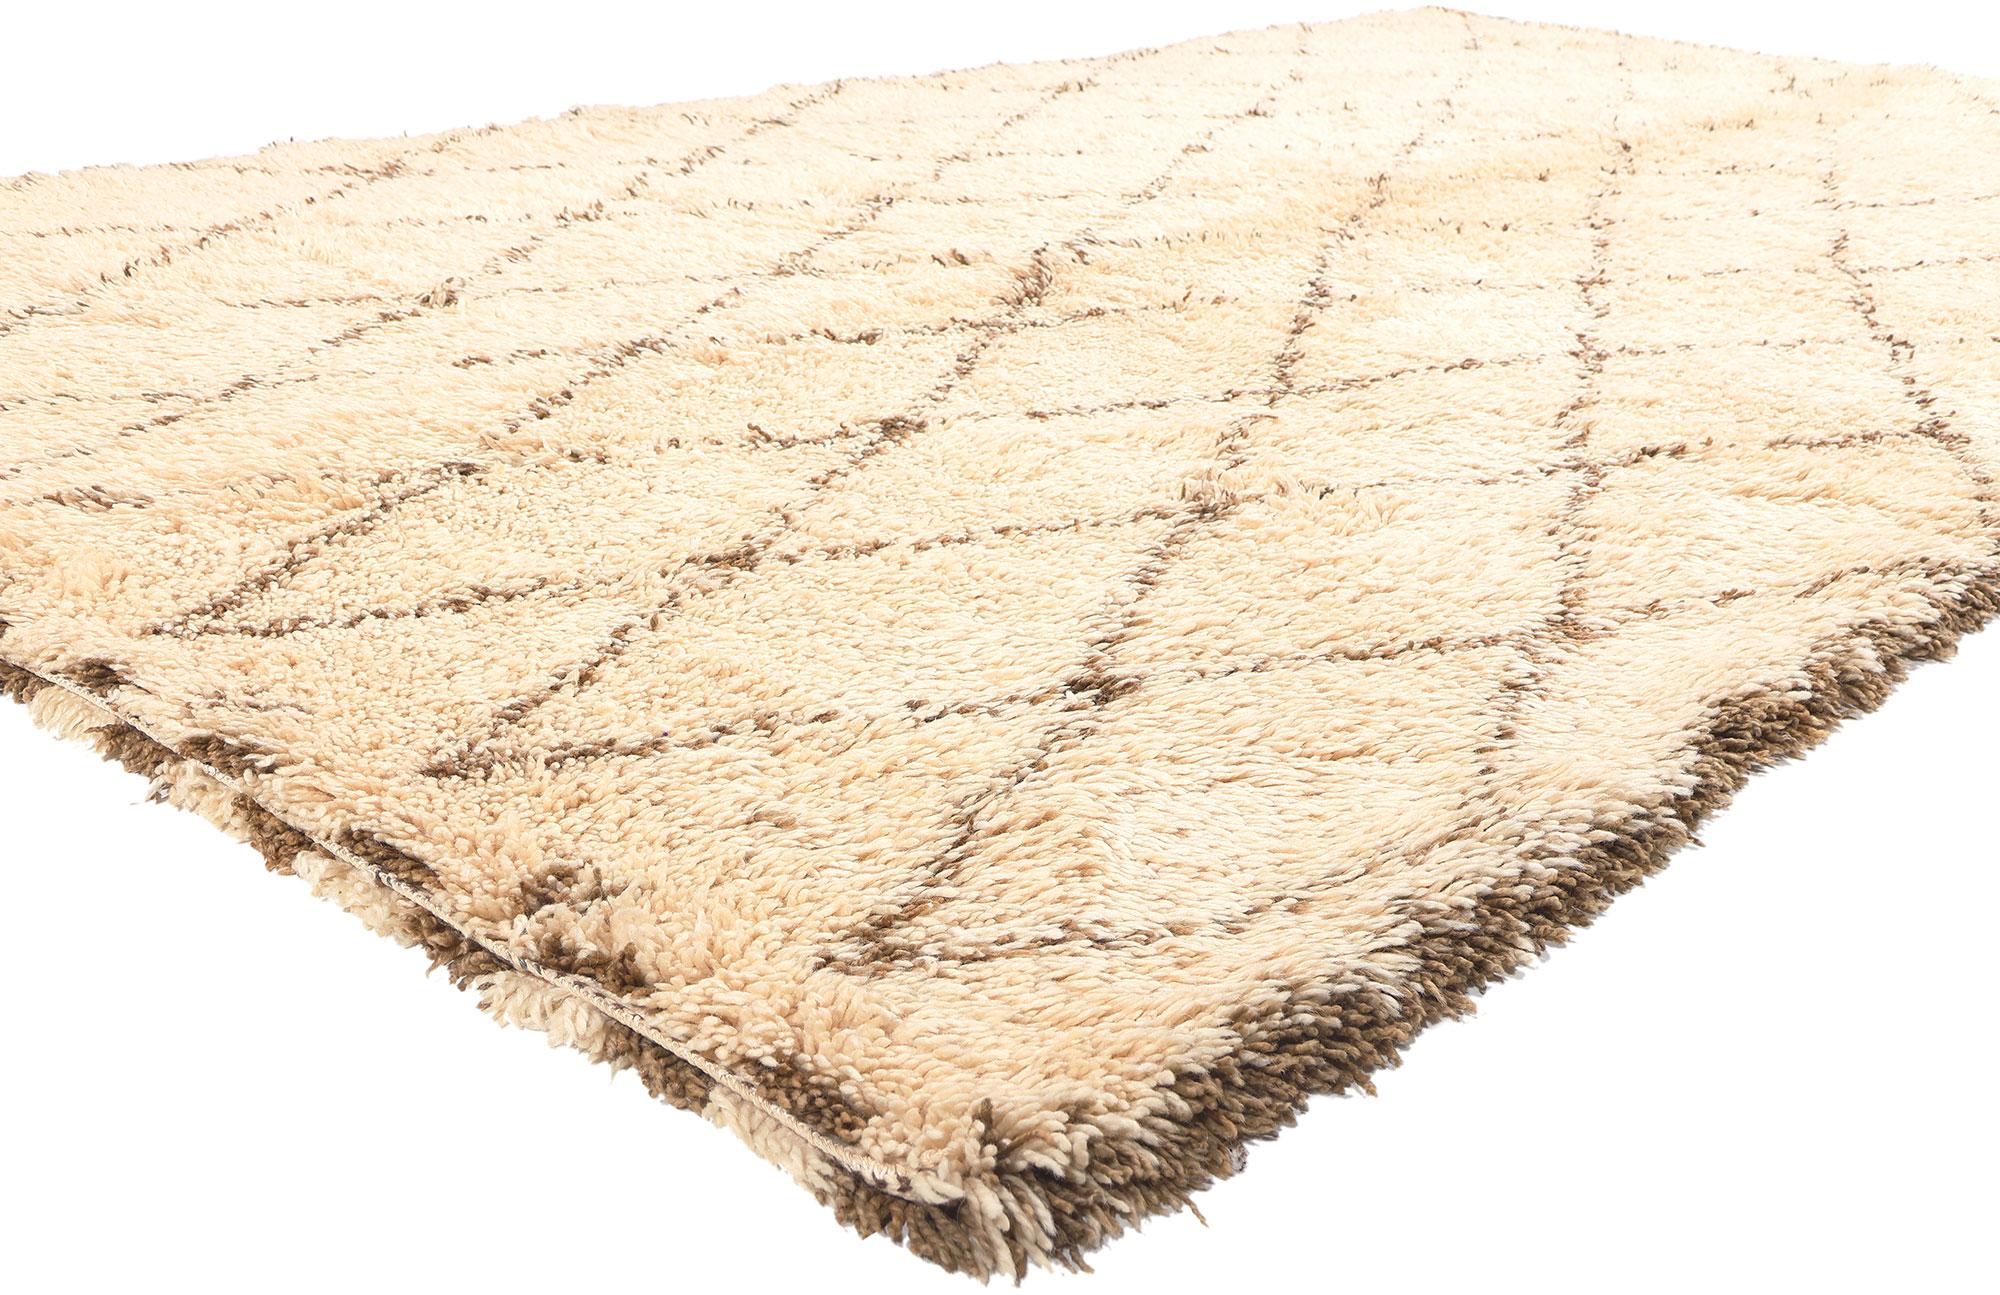 20338 Vintage Moroccan Beni Ourain Rug, 06'08 x 12'00.

In the fusion of Shibui and Midcentury Modern aesthetics emerges this hand-knotted wool vintage Moroccan Beni Ourain rug—an exquisite blend of simplicity and timeless design. The lozenge